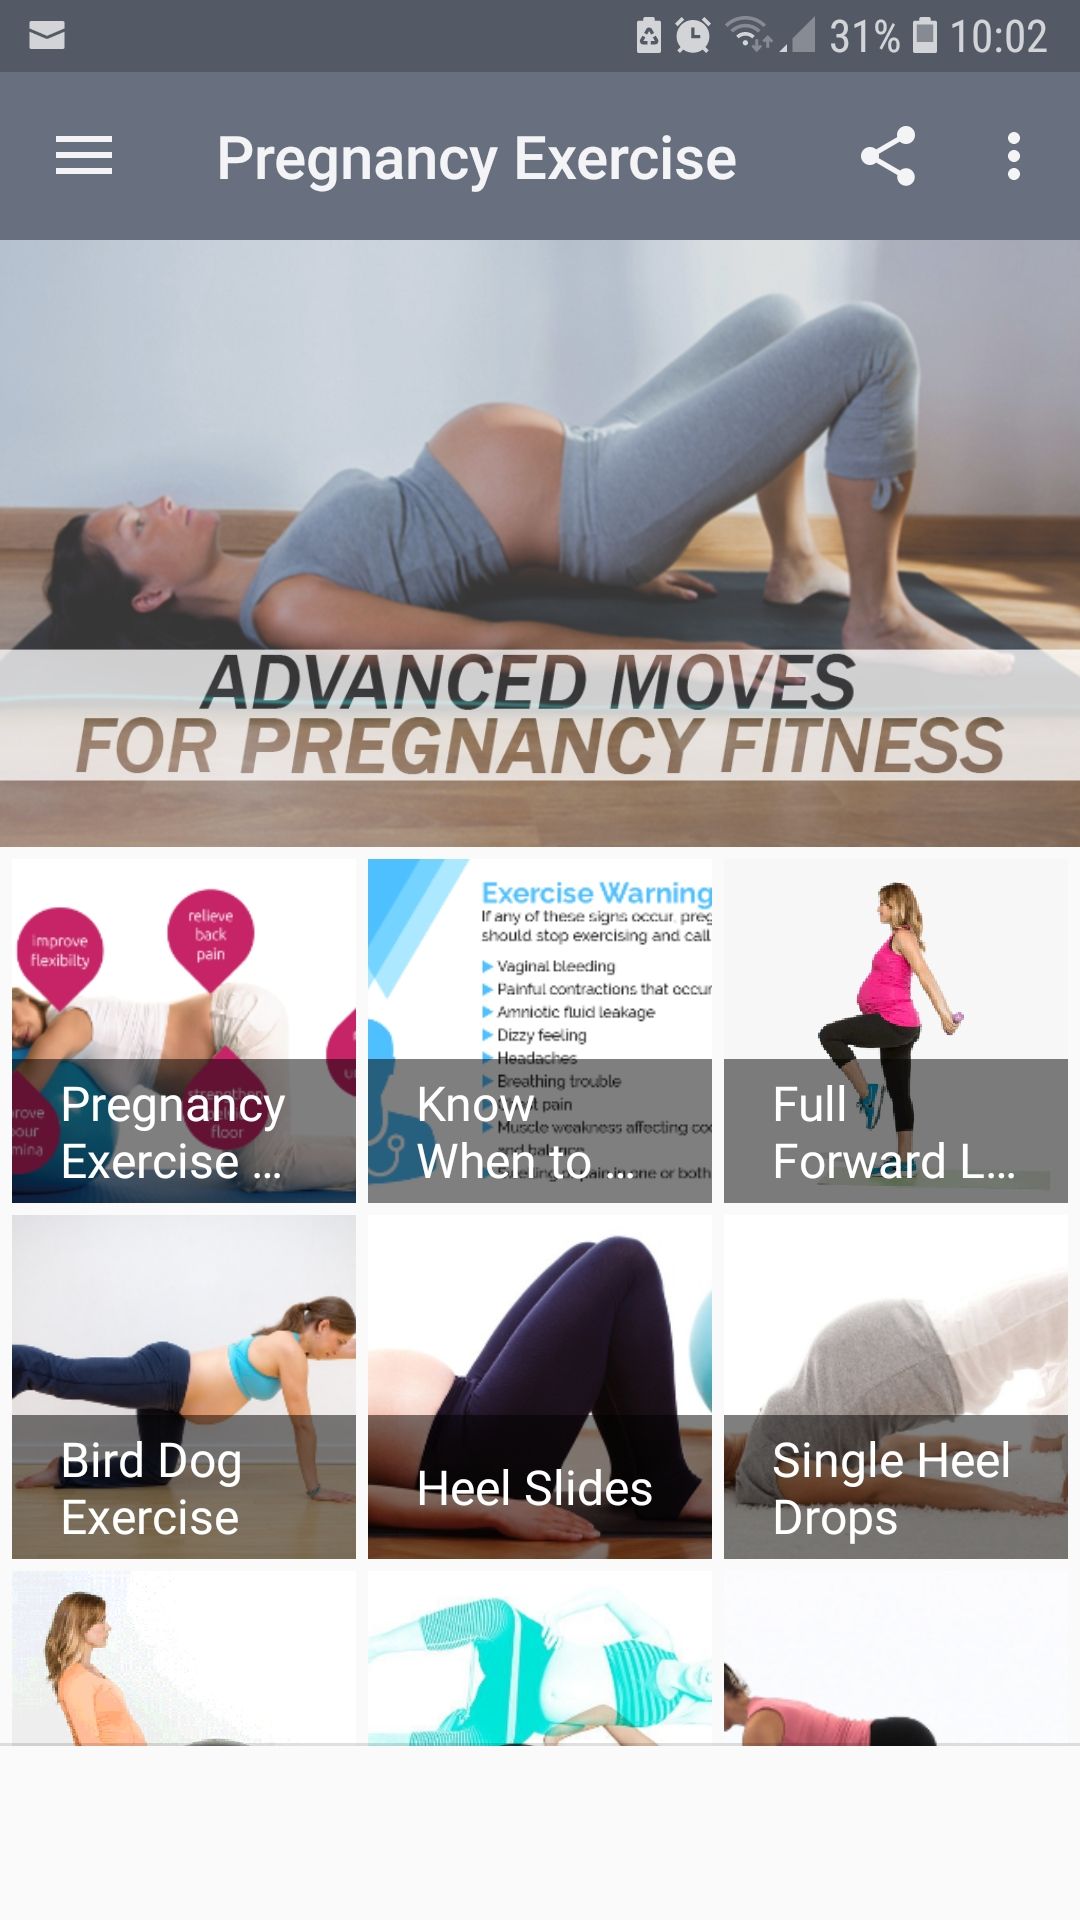 Pregnancy Exercise mobile exercise app